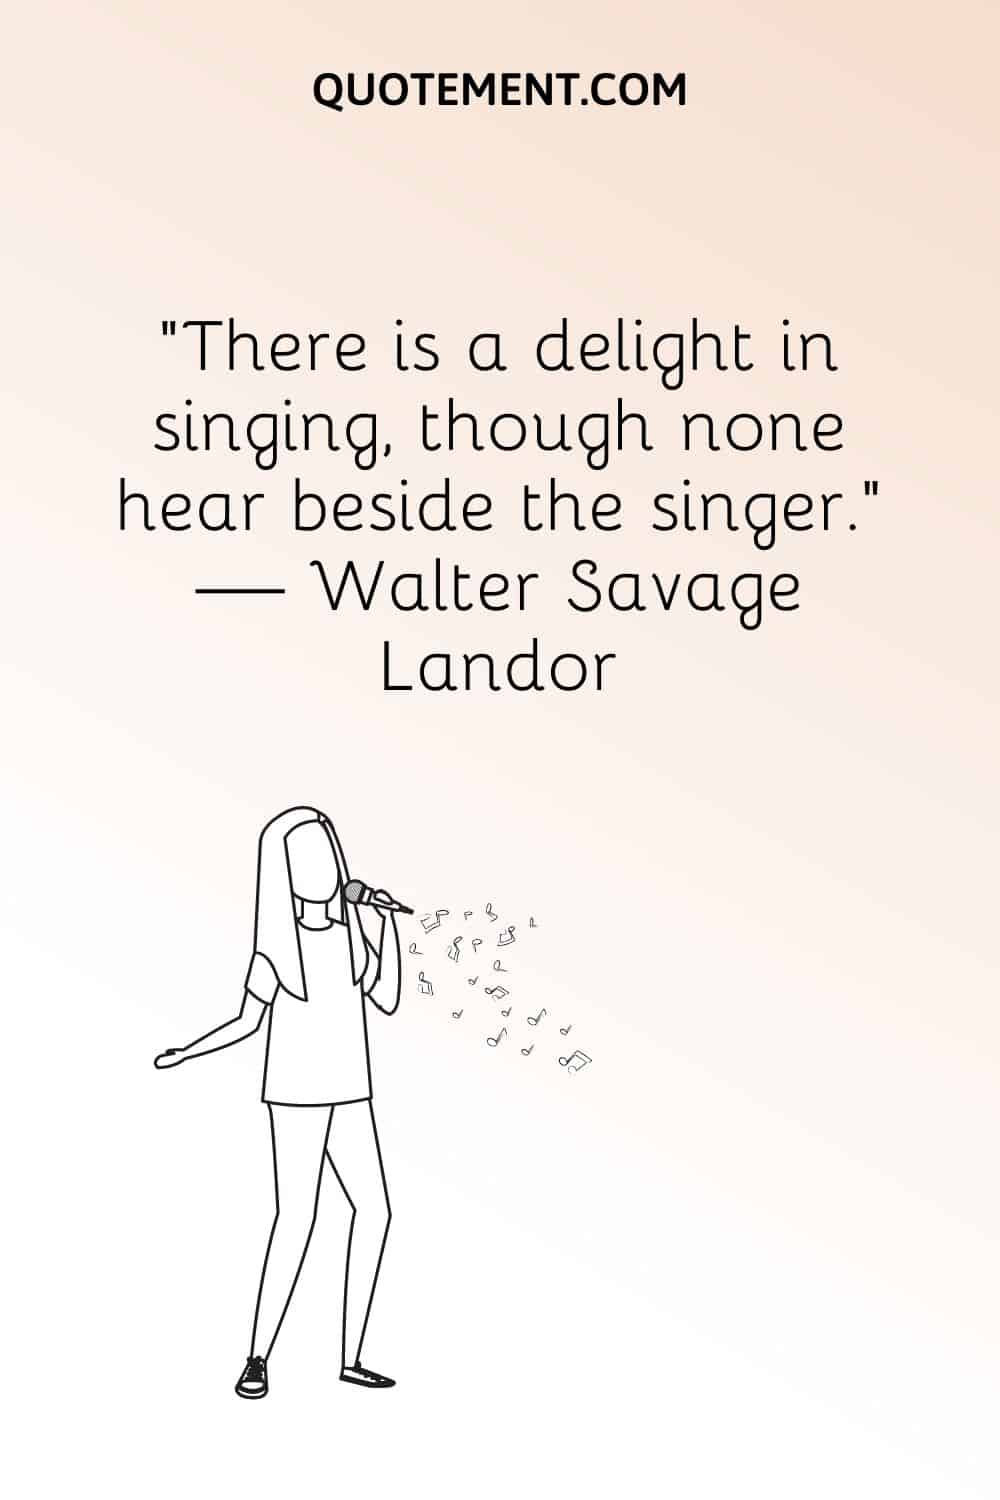 “There is a delight in singing, though none hear beside the singer.” — Walter Savage Landor